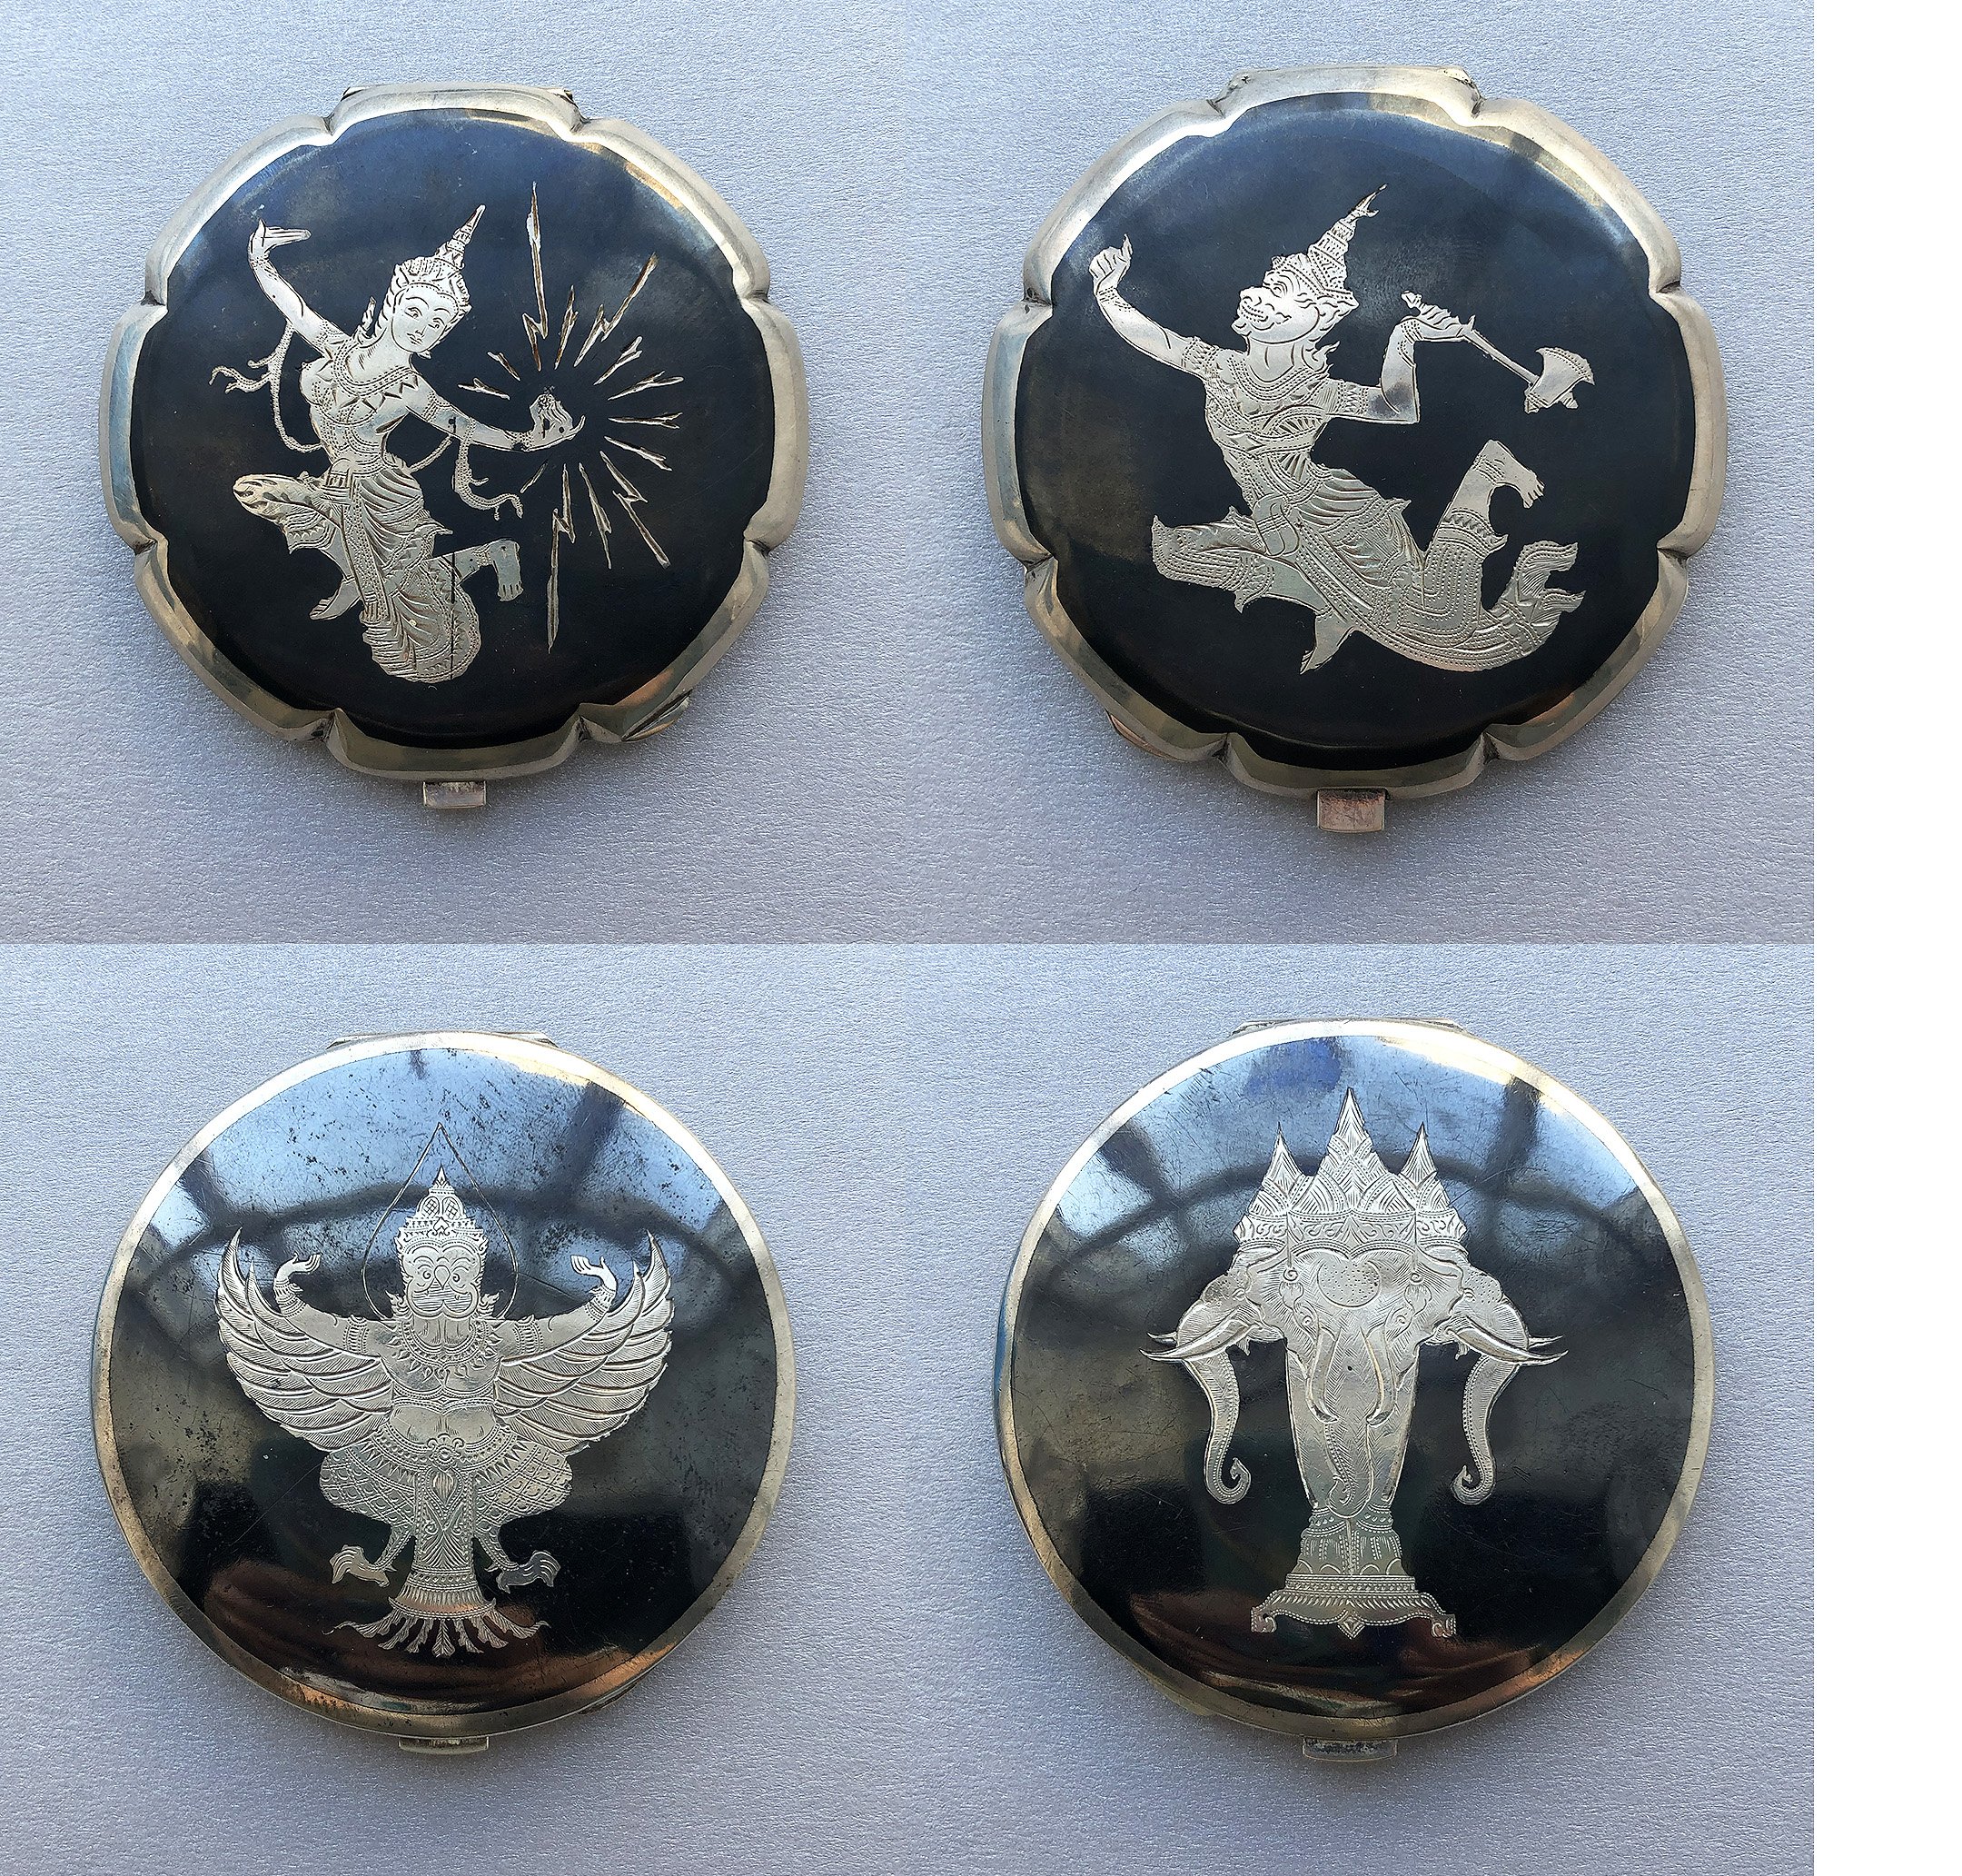   Nielloware Compacts 1940s-1970s   Nielloware is a metalwork craft made by carving a design into a silver background and adding niello, a black-colored metal alloy, to fill in the negative space around the design. Nielloware has been a part of Thail